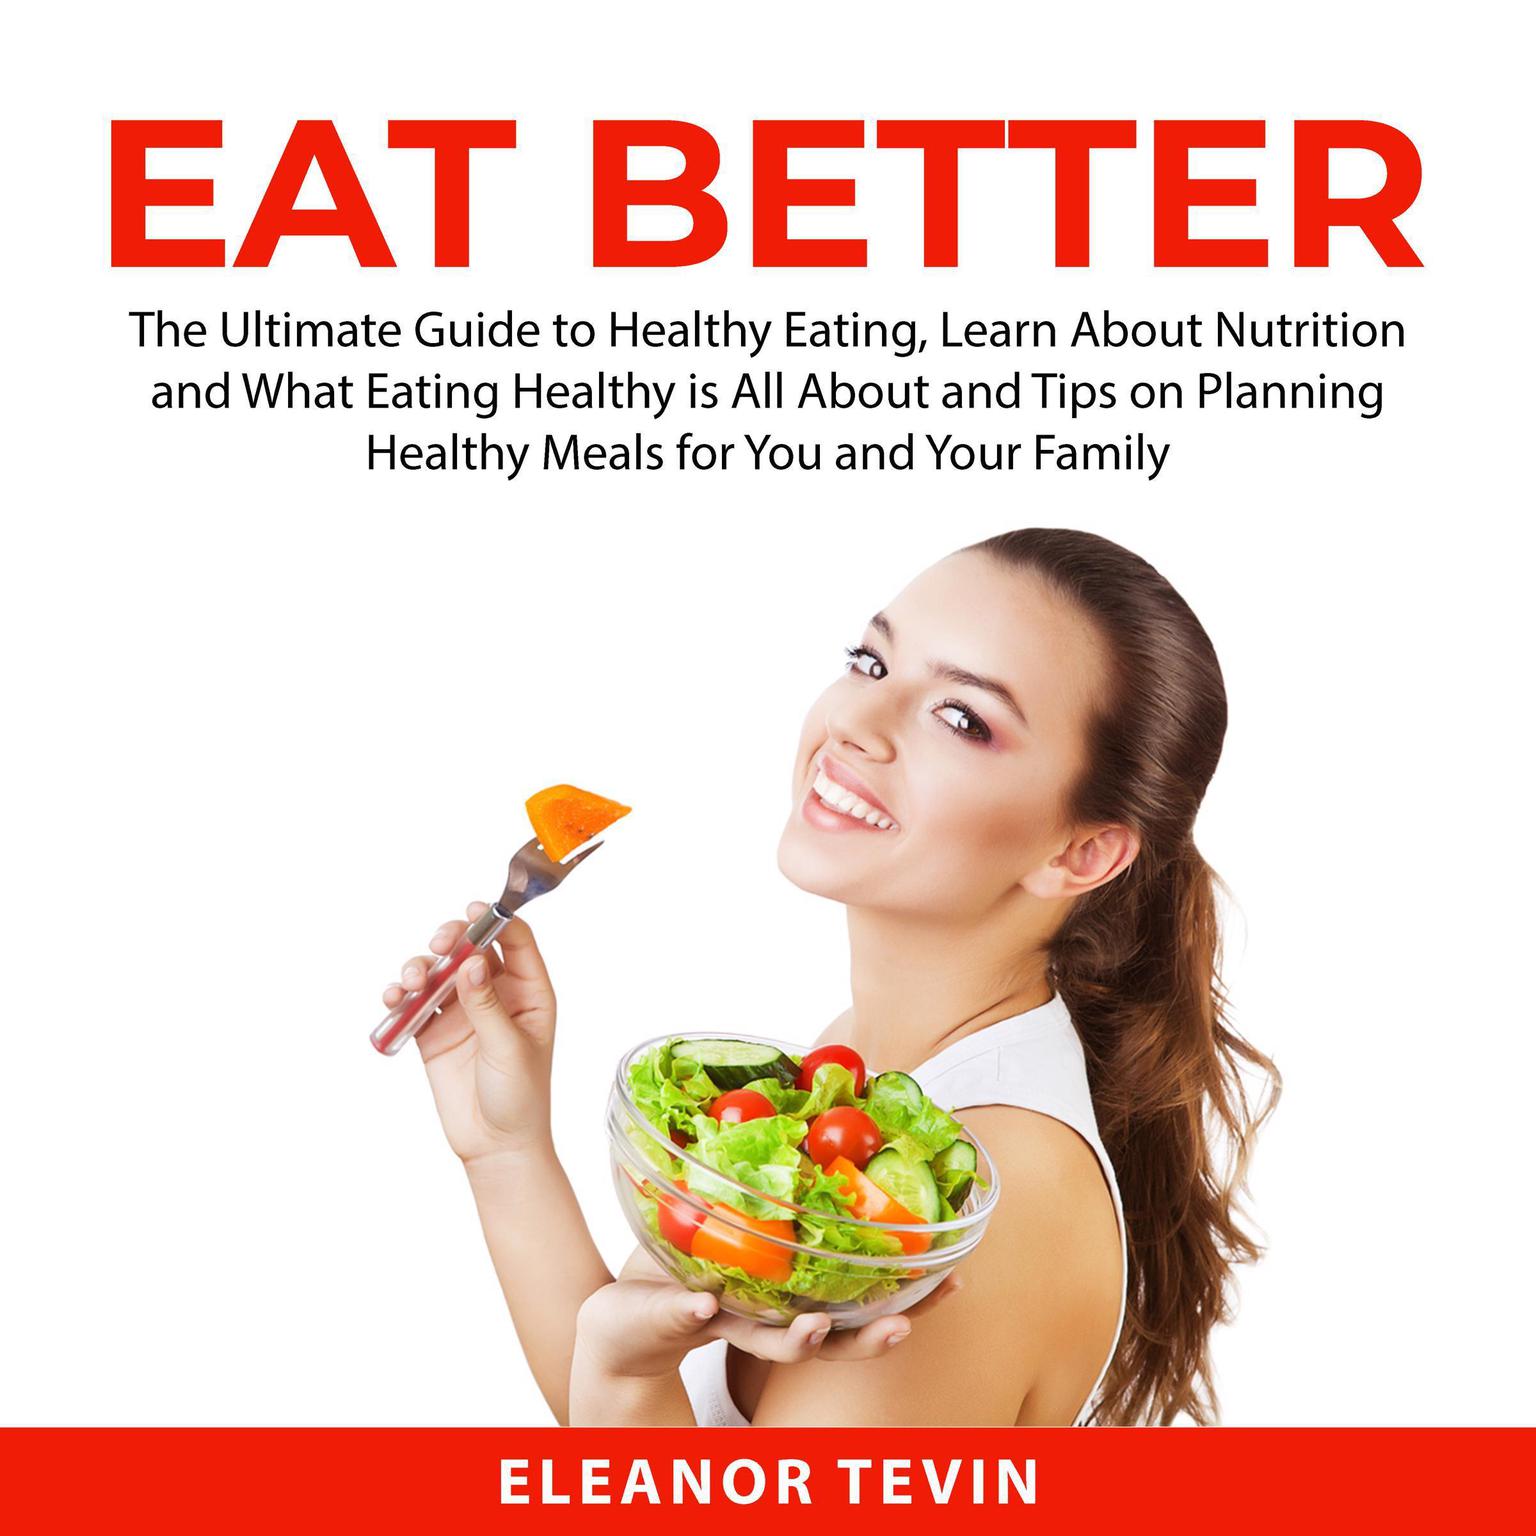 Eat Better: The Ultimate Guide to Healthy Eating, Learn About Nutrition and What Eating Healthy is All About and Tips on Planning Healthy Meals for You and Your Family Audiobook, by Eleanor Tevin